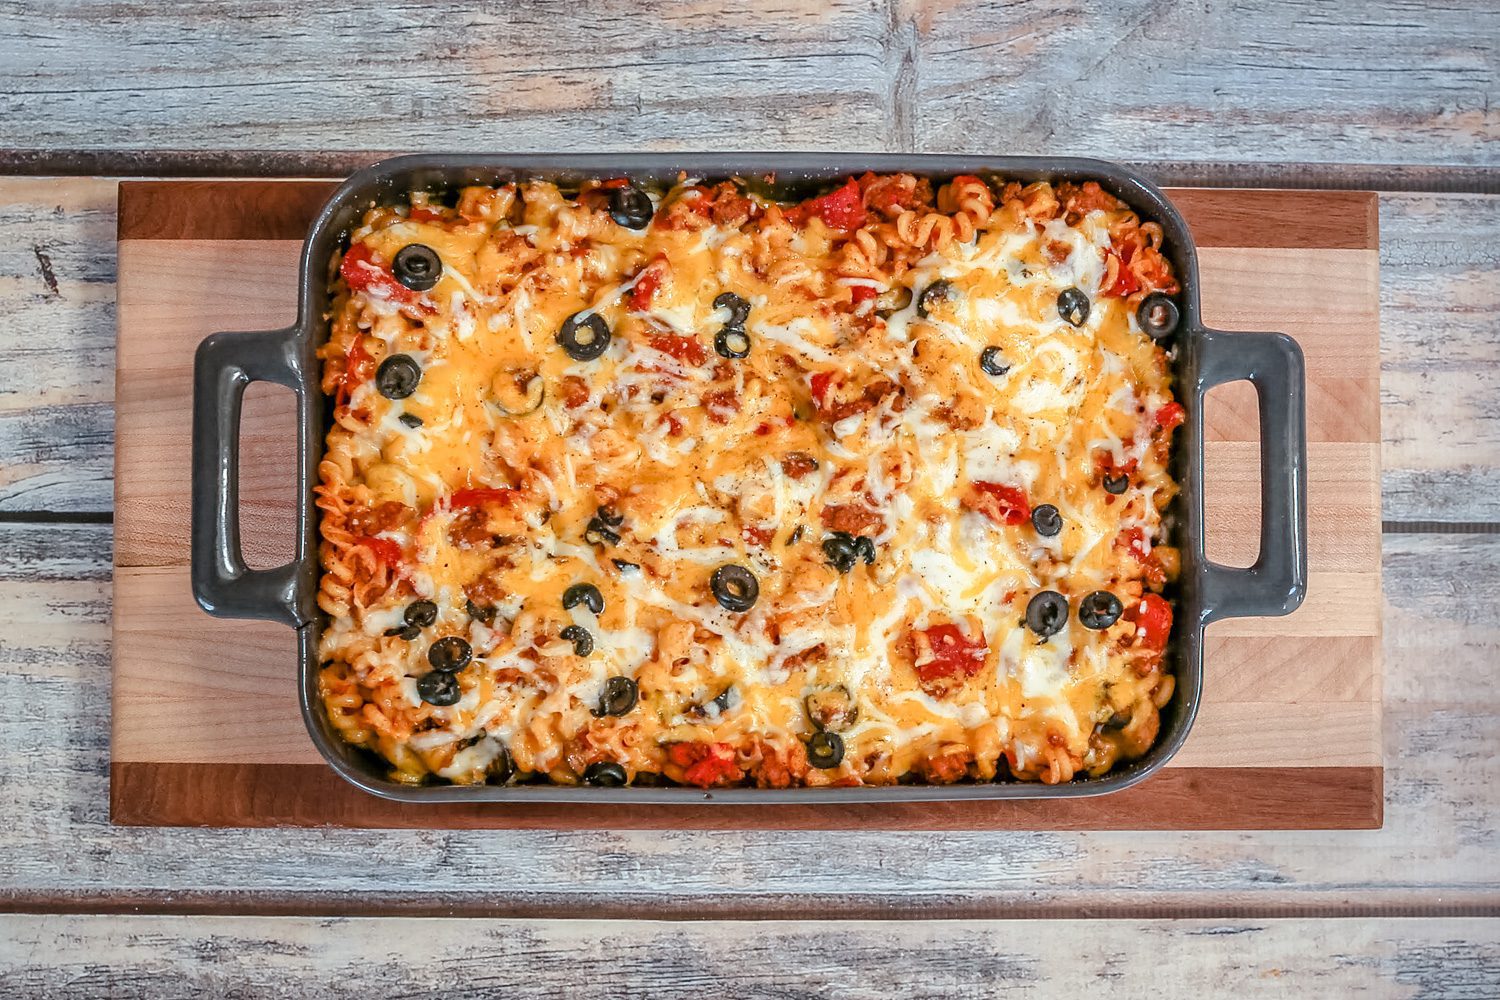 Baked pizza casserole on a cutting board